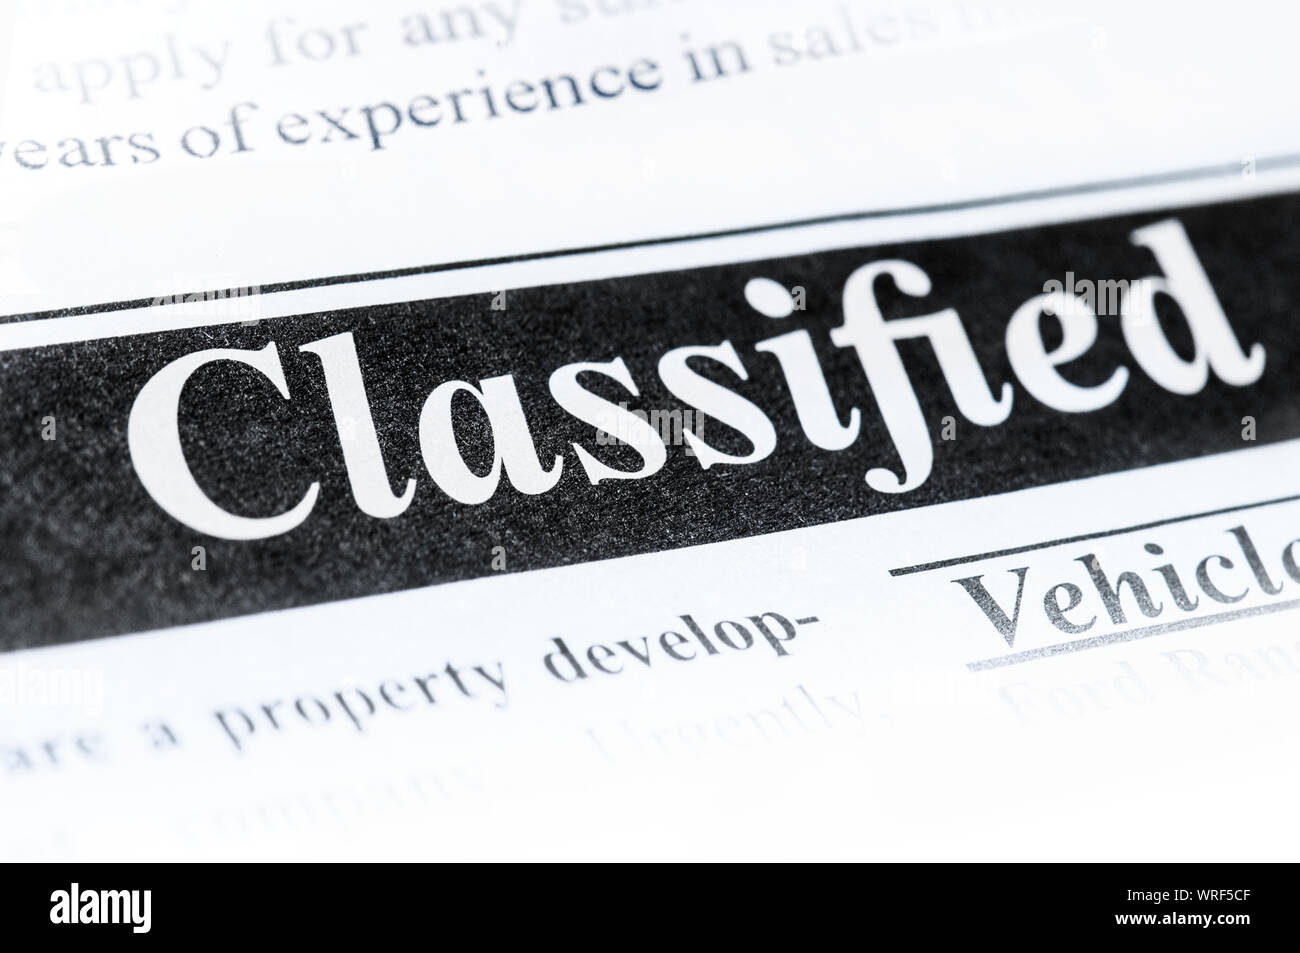 Classifieds ad section in newspaper Stock Photo